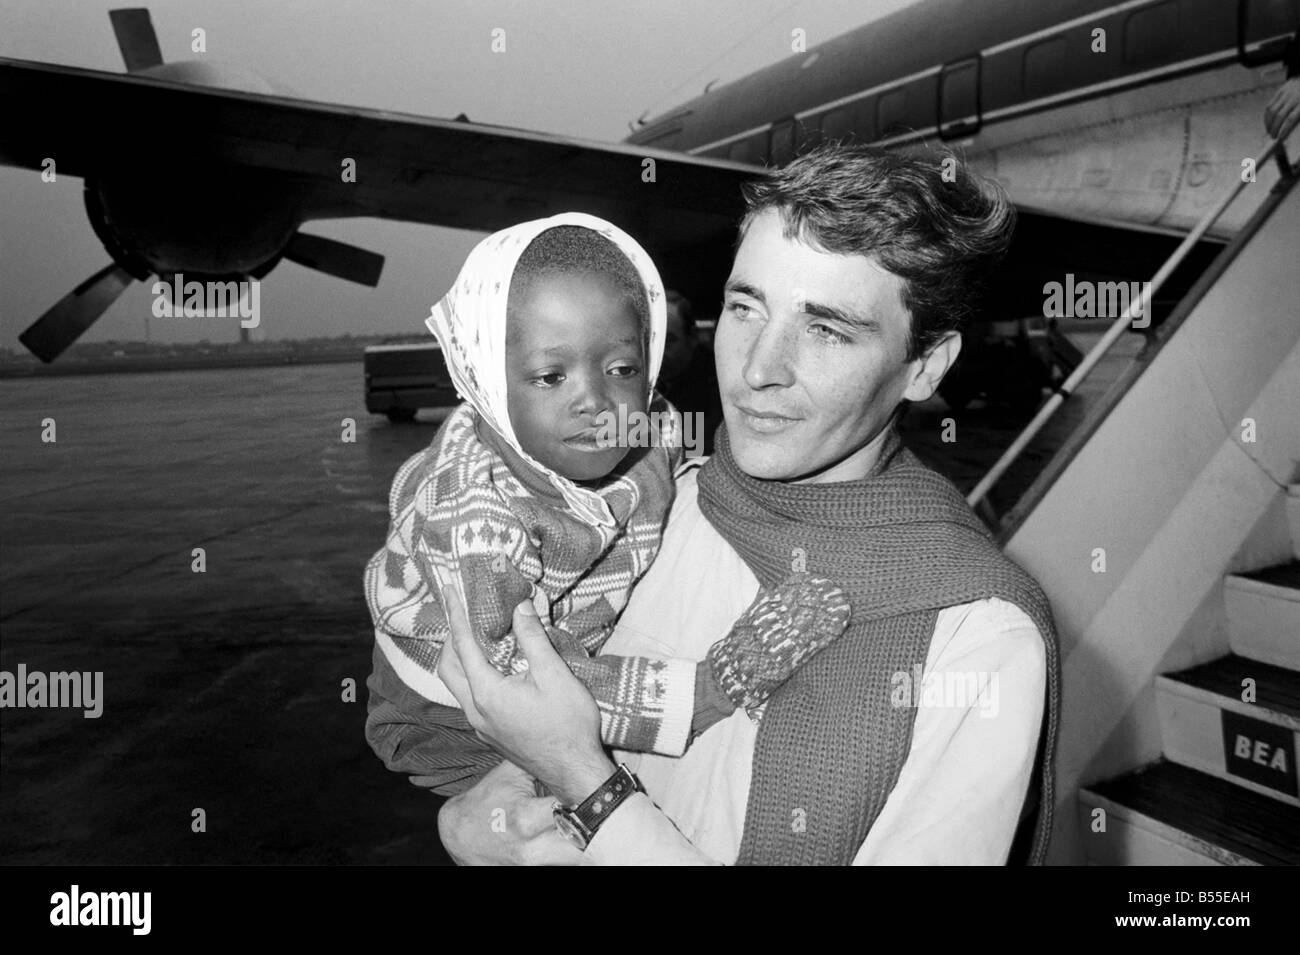 Five sick biafran children who have fled their war torn home arrived in London Yesterday (Fri) on a Mercy Flight from ULI. Their aircraft left the airstrip only minutes after a bombing raid on Wednesday. The two teenaged girls, two boys aged 10 and five and an 18 months old baby girl will be cared for in hospitals in England and Ireland. Cyrina Eleebe (held by man), who is going on to Germany. December 1969 Z12284-004 Stock Photo